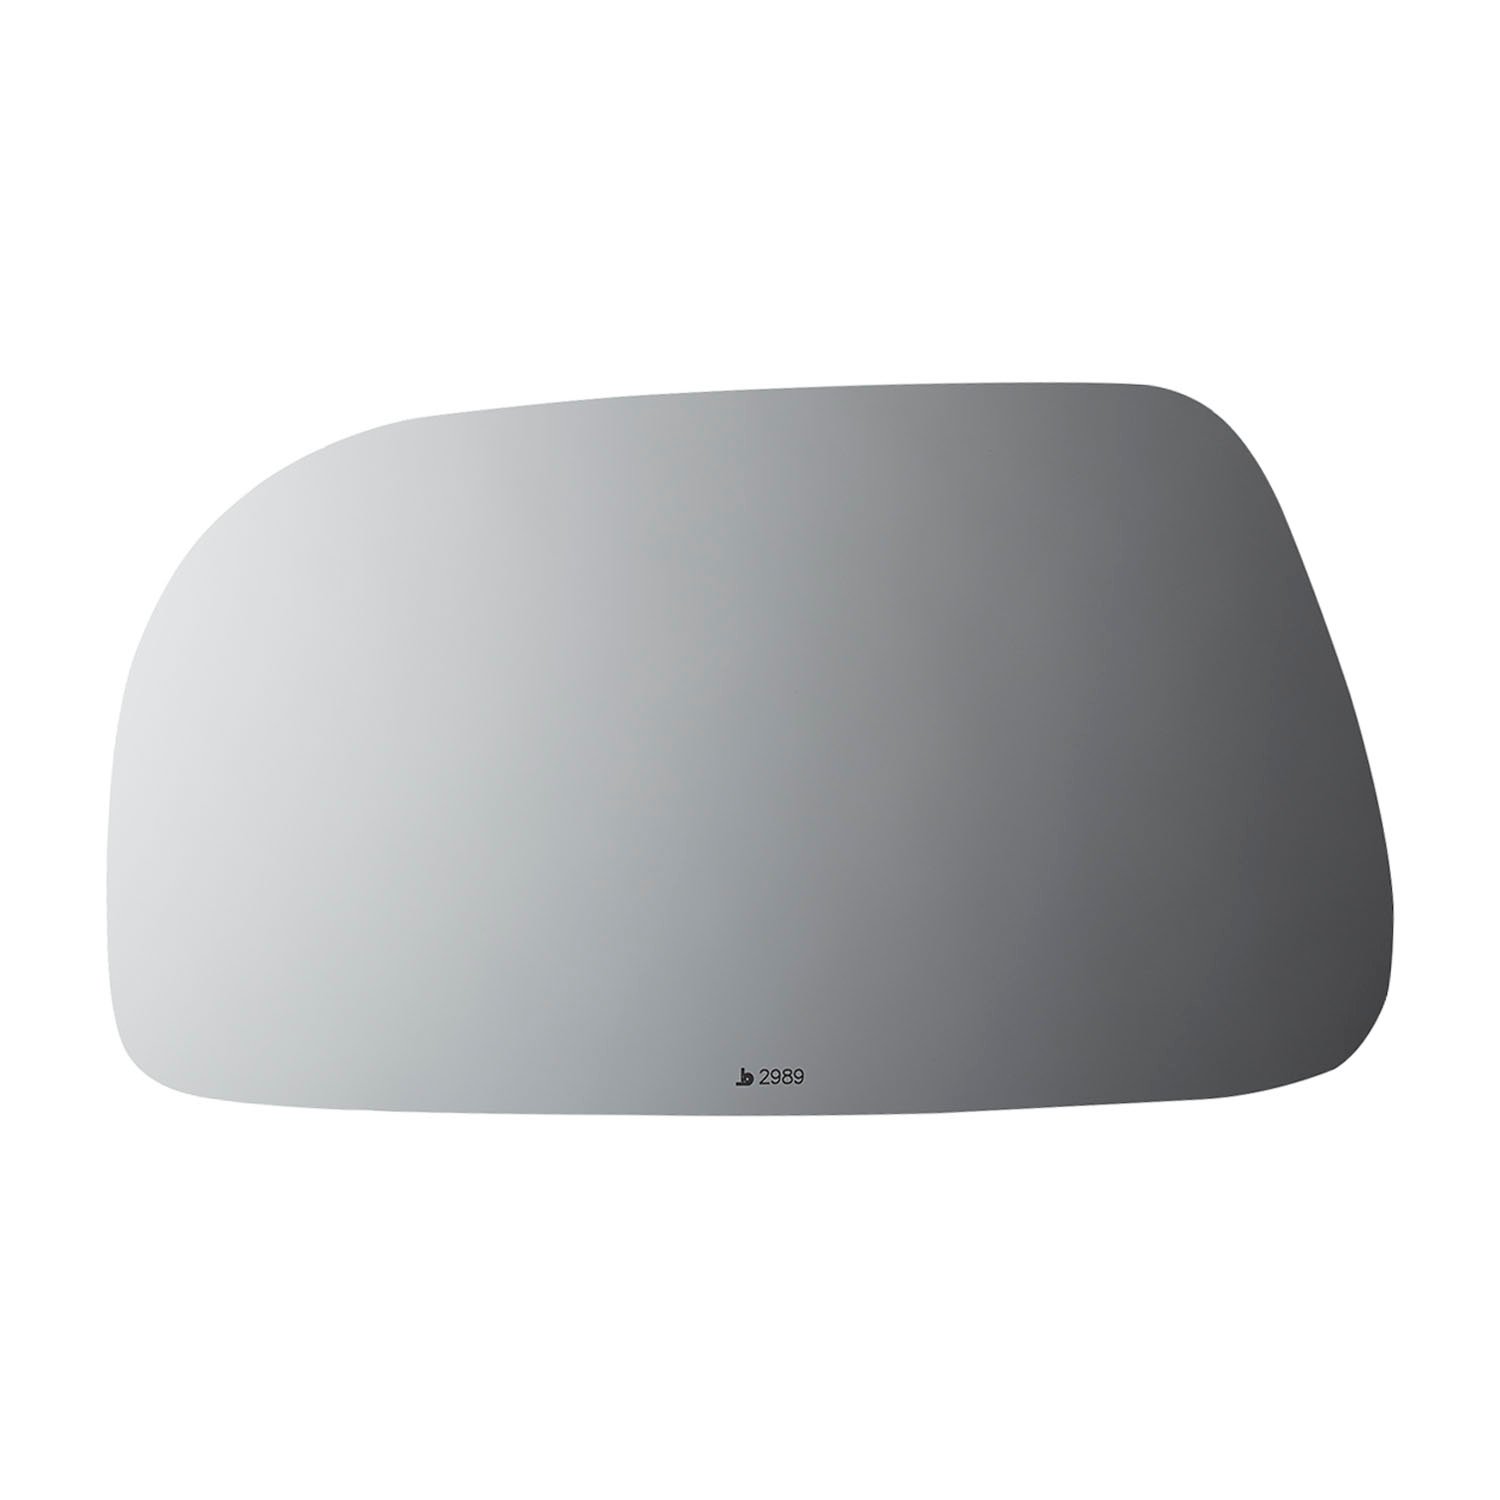 2989 SIDE VIEW MIRROR